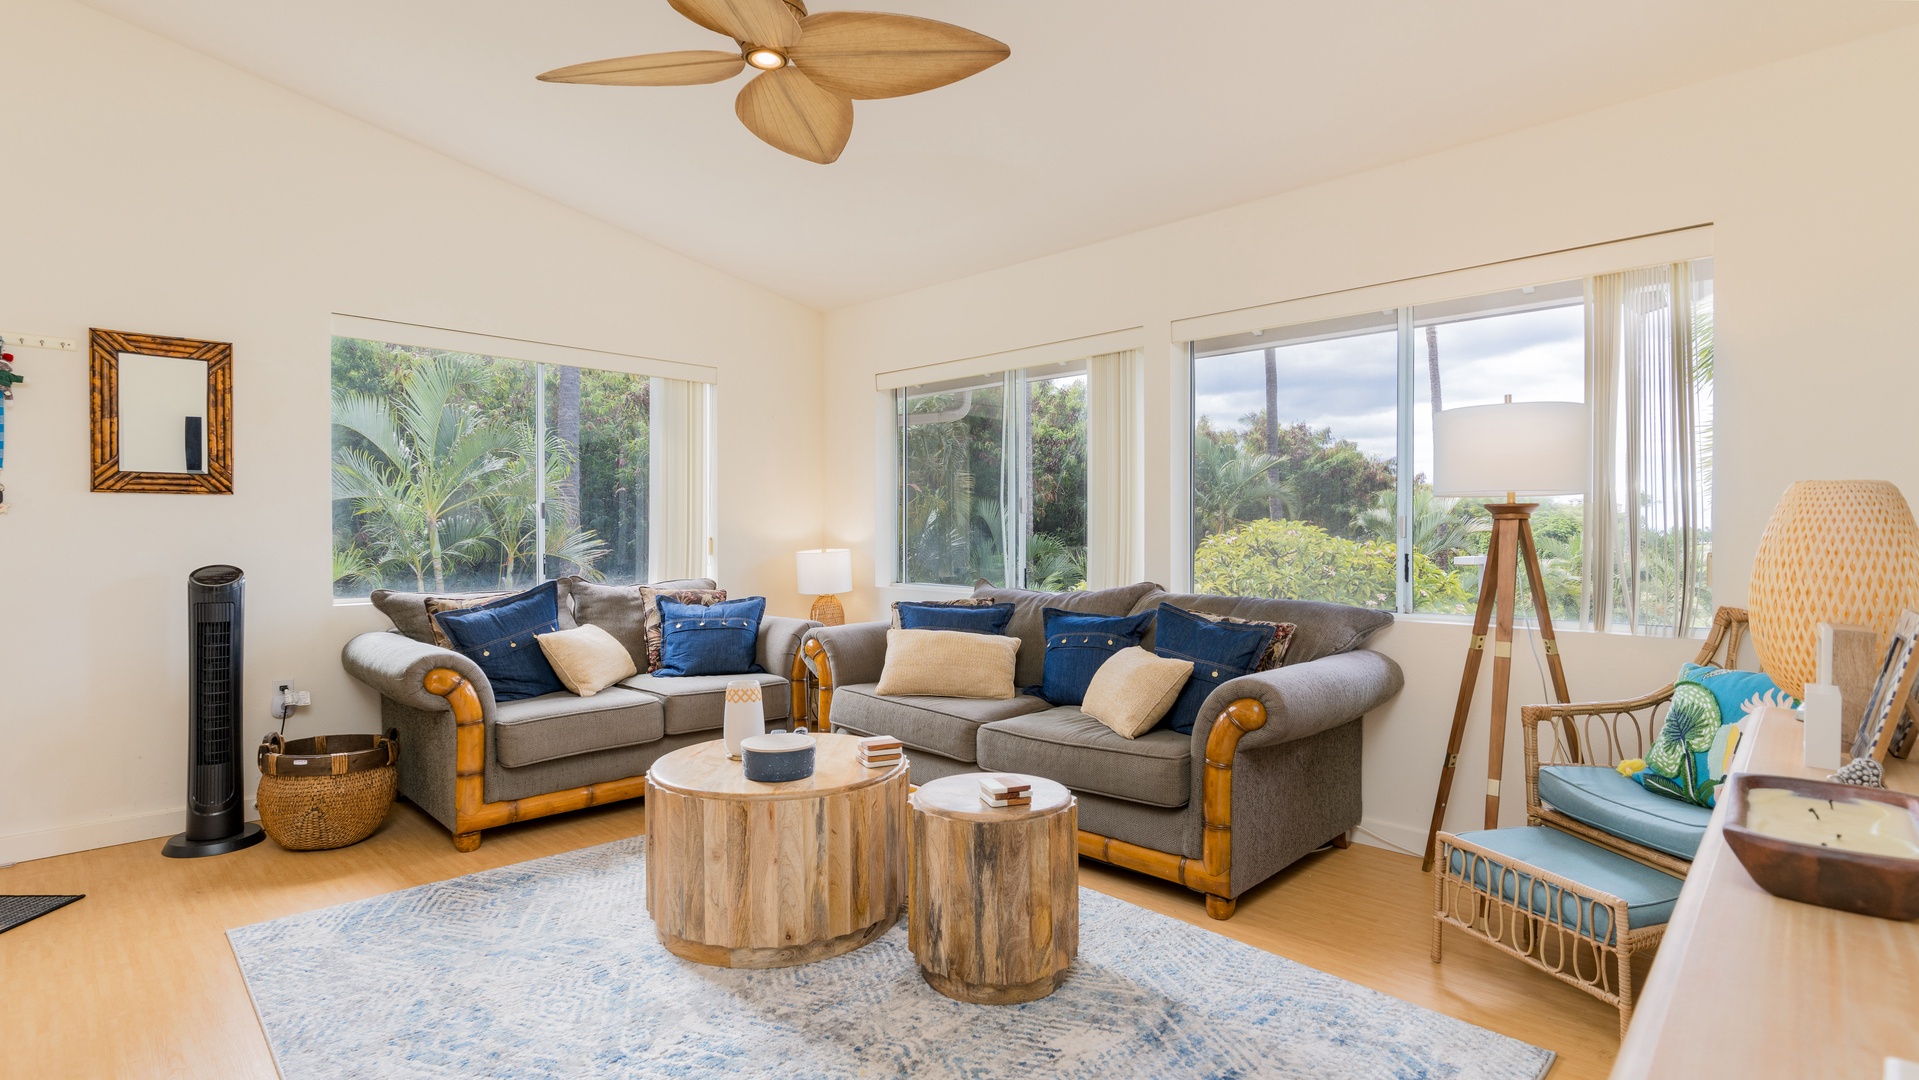 Kapolei Vacation Rentals, Fairways at Ko Olina 4A - Sink into the plush seating in the living area surrounded by natural wood tones.